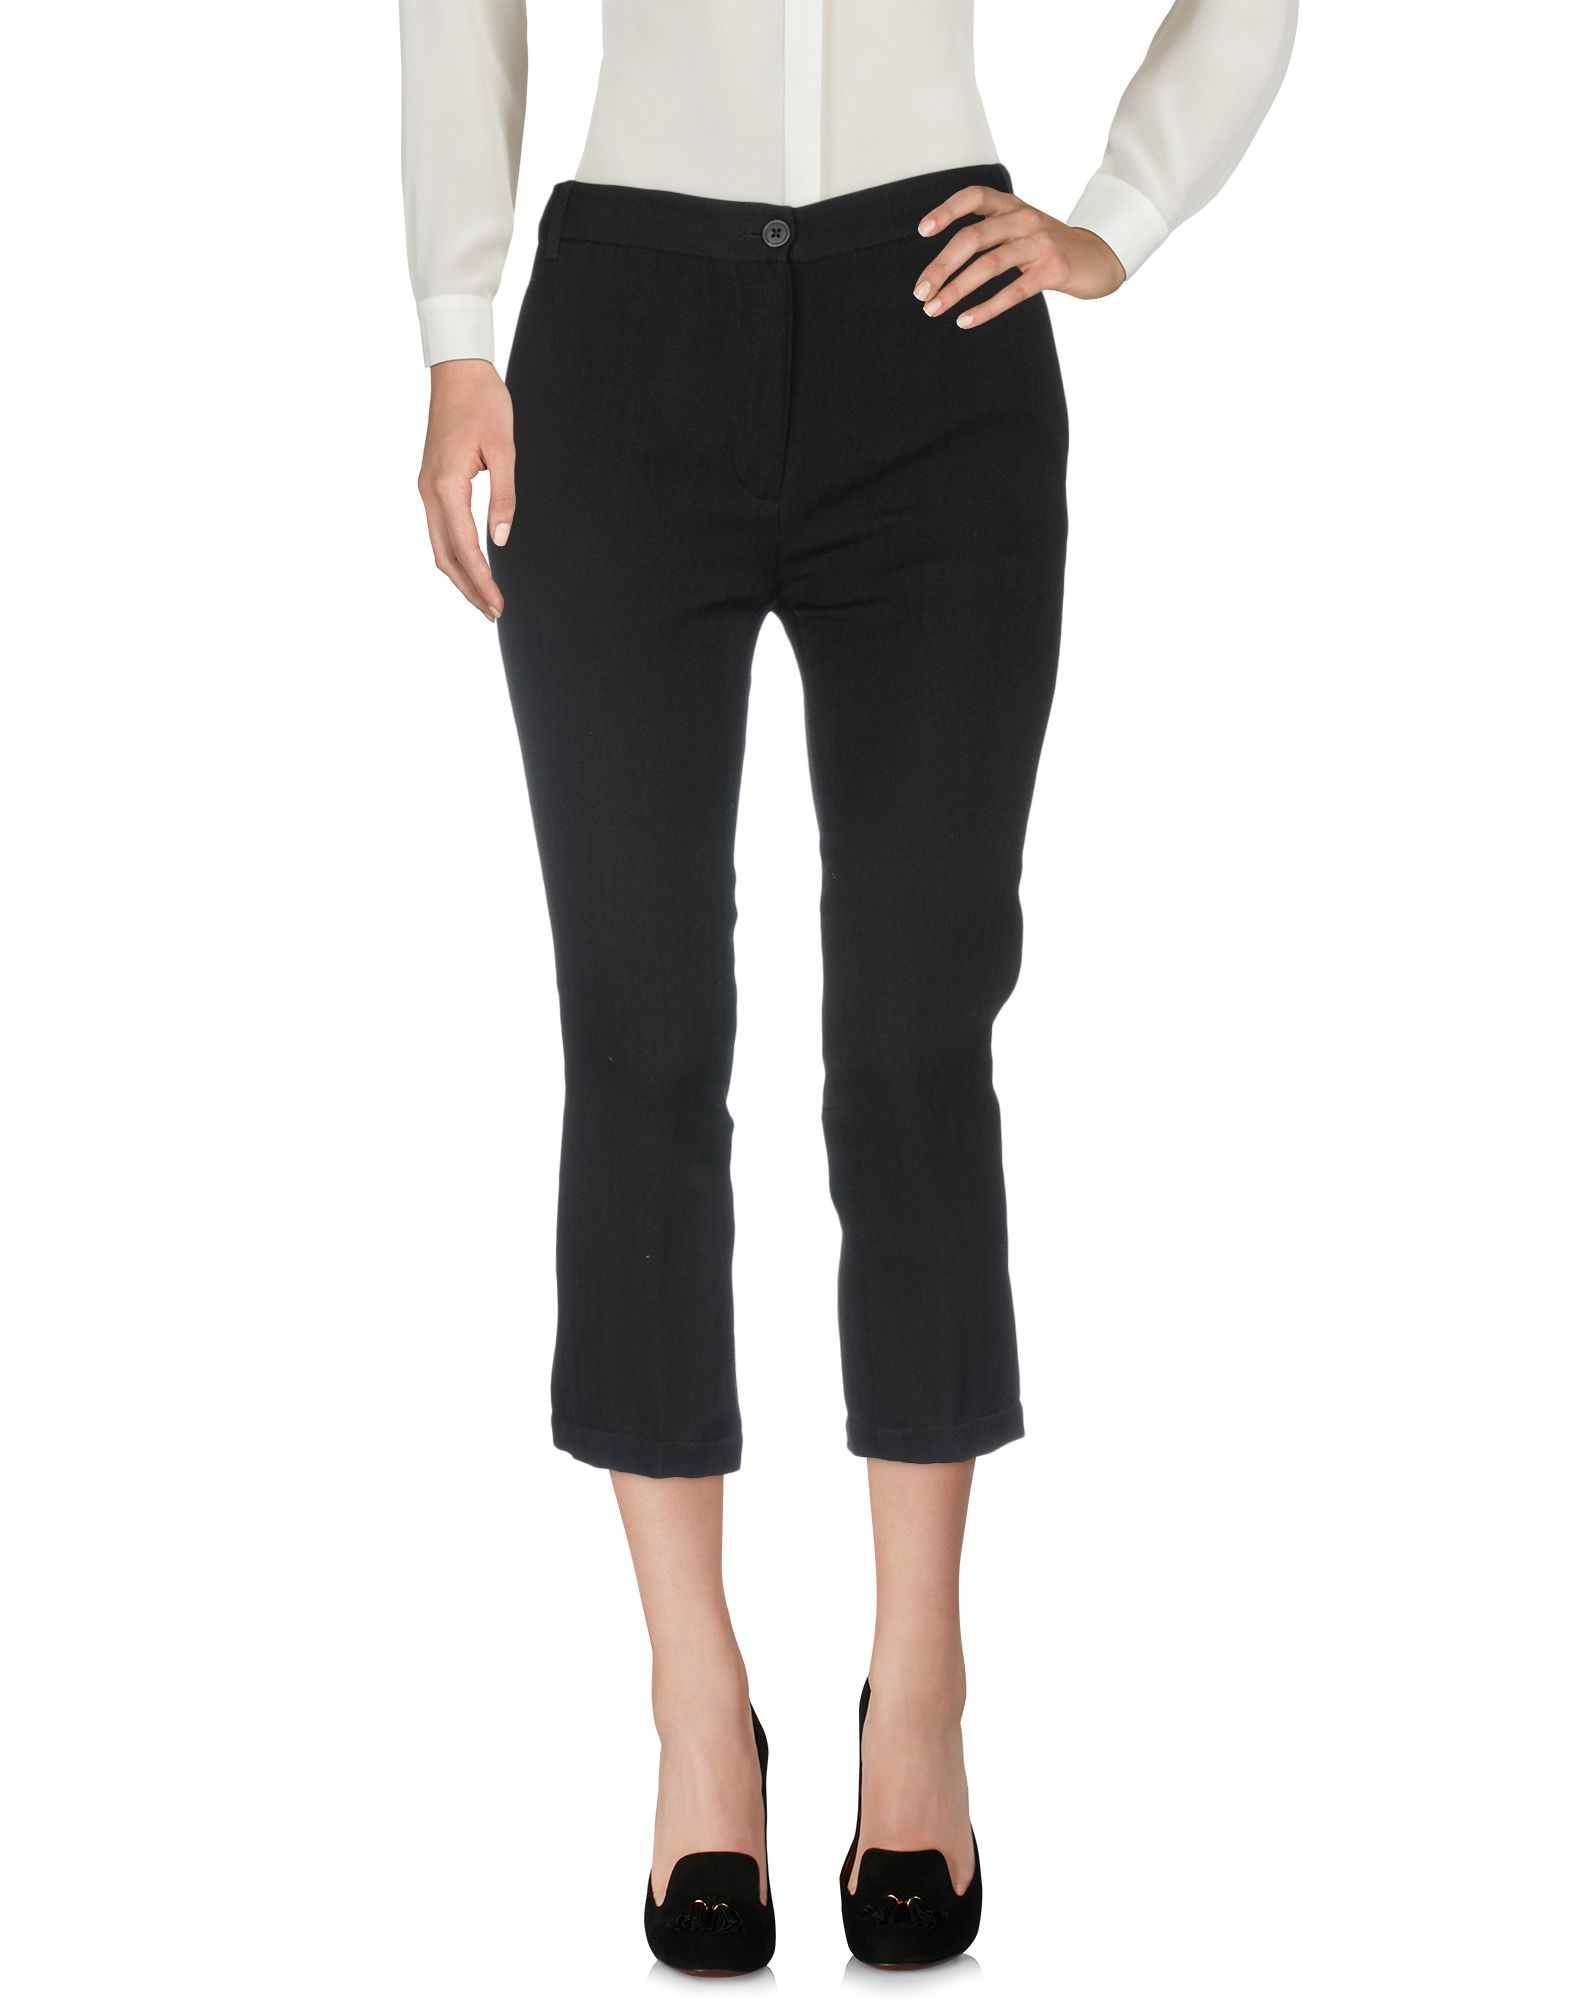 ANN DEMEULEMEESTER Casual pants,13180000GB 4